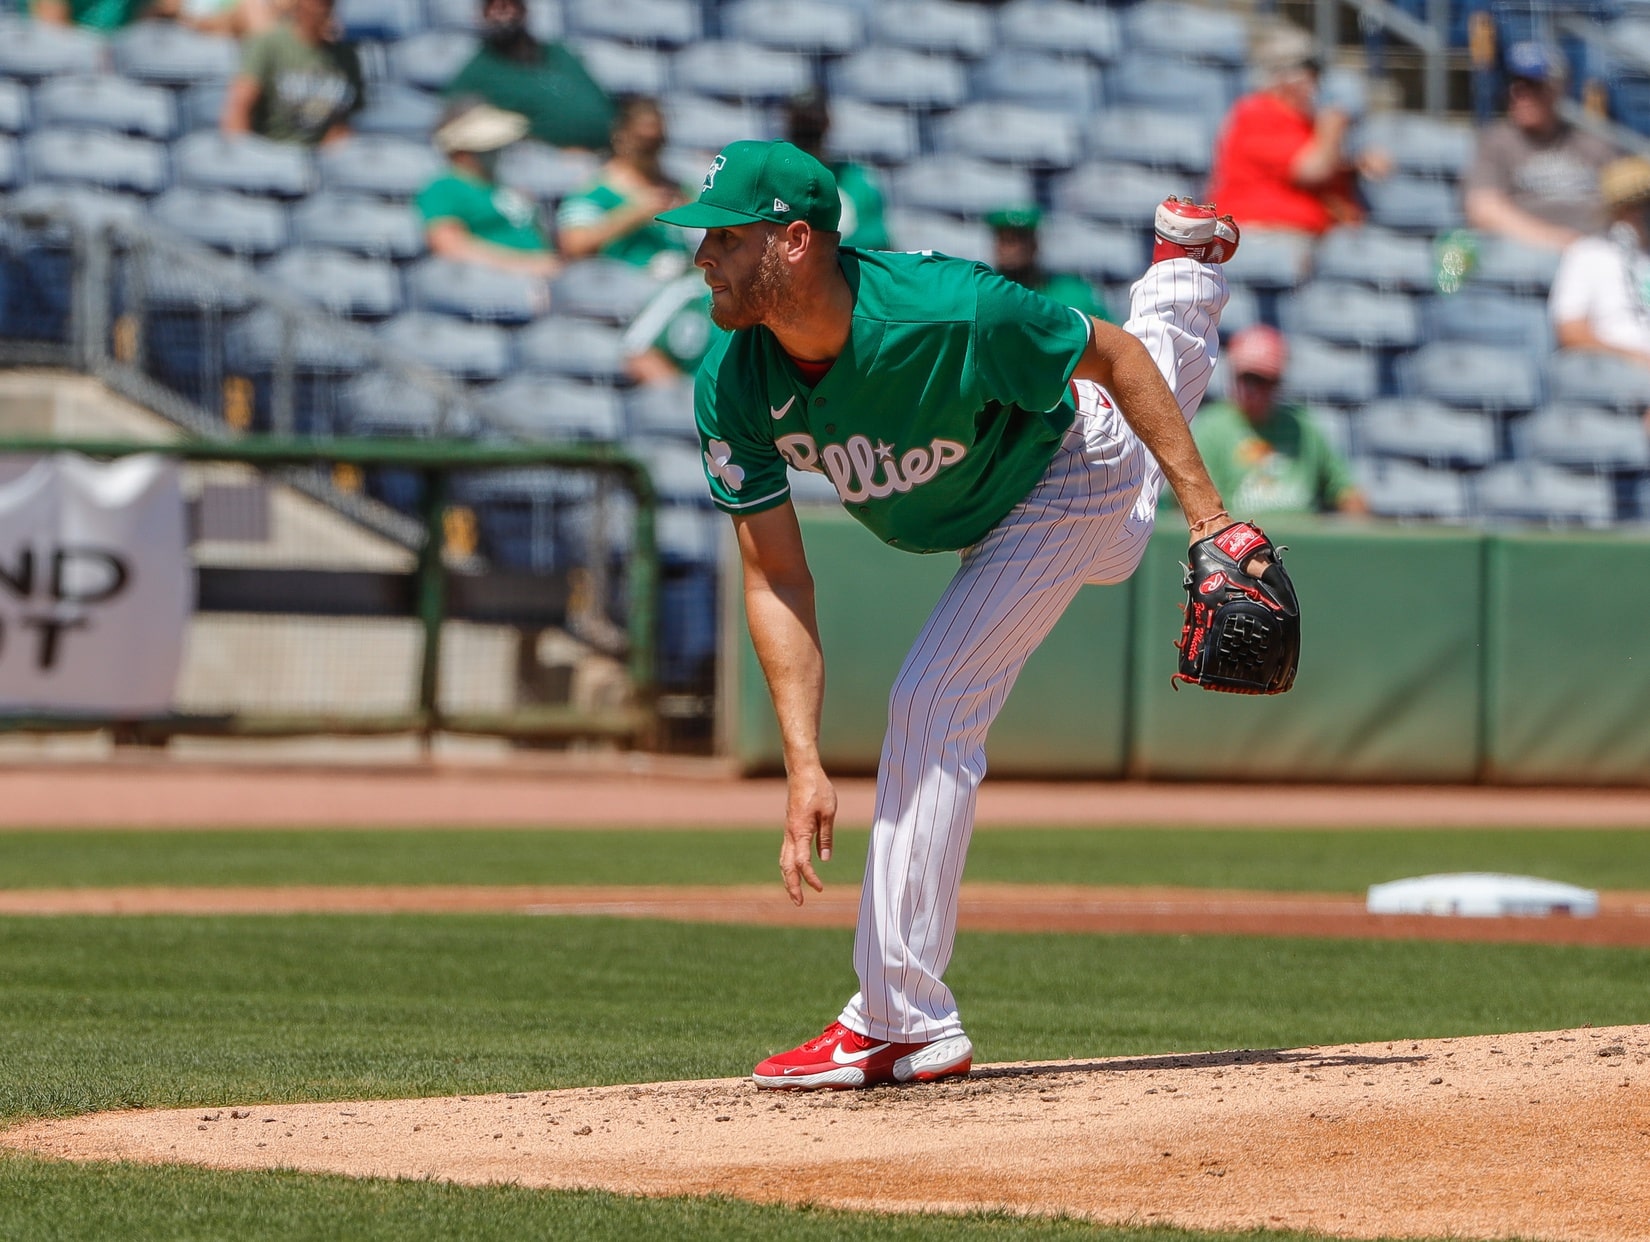 Phillies Won’t Wear Green Uniforms on St. Patrick’s Day